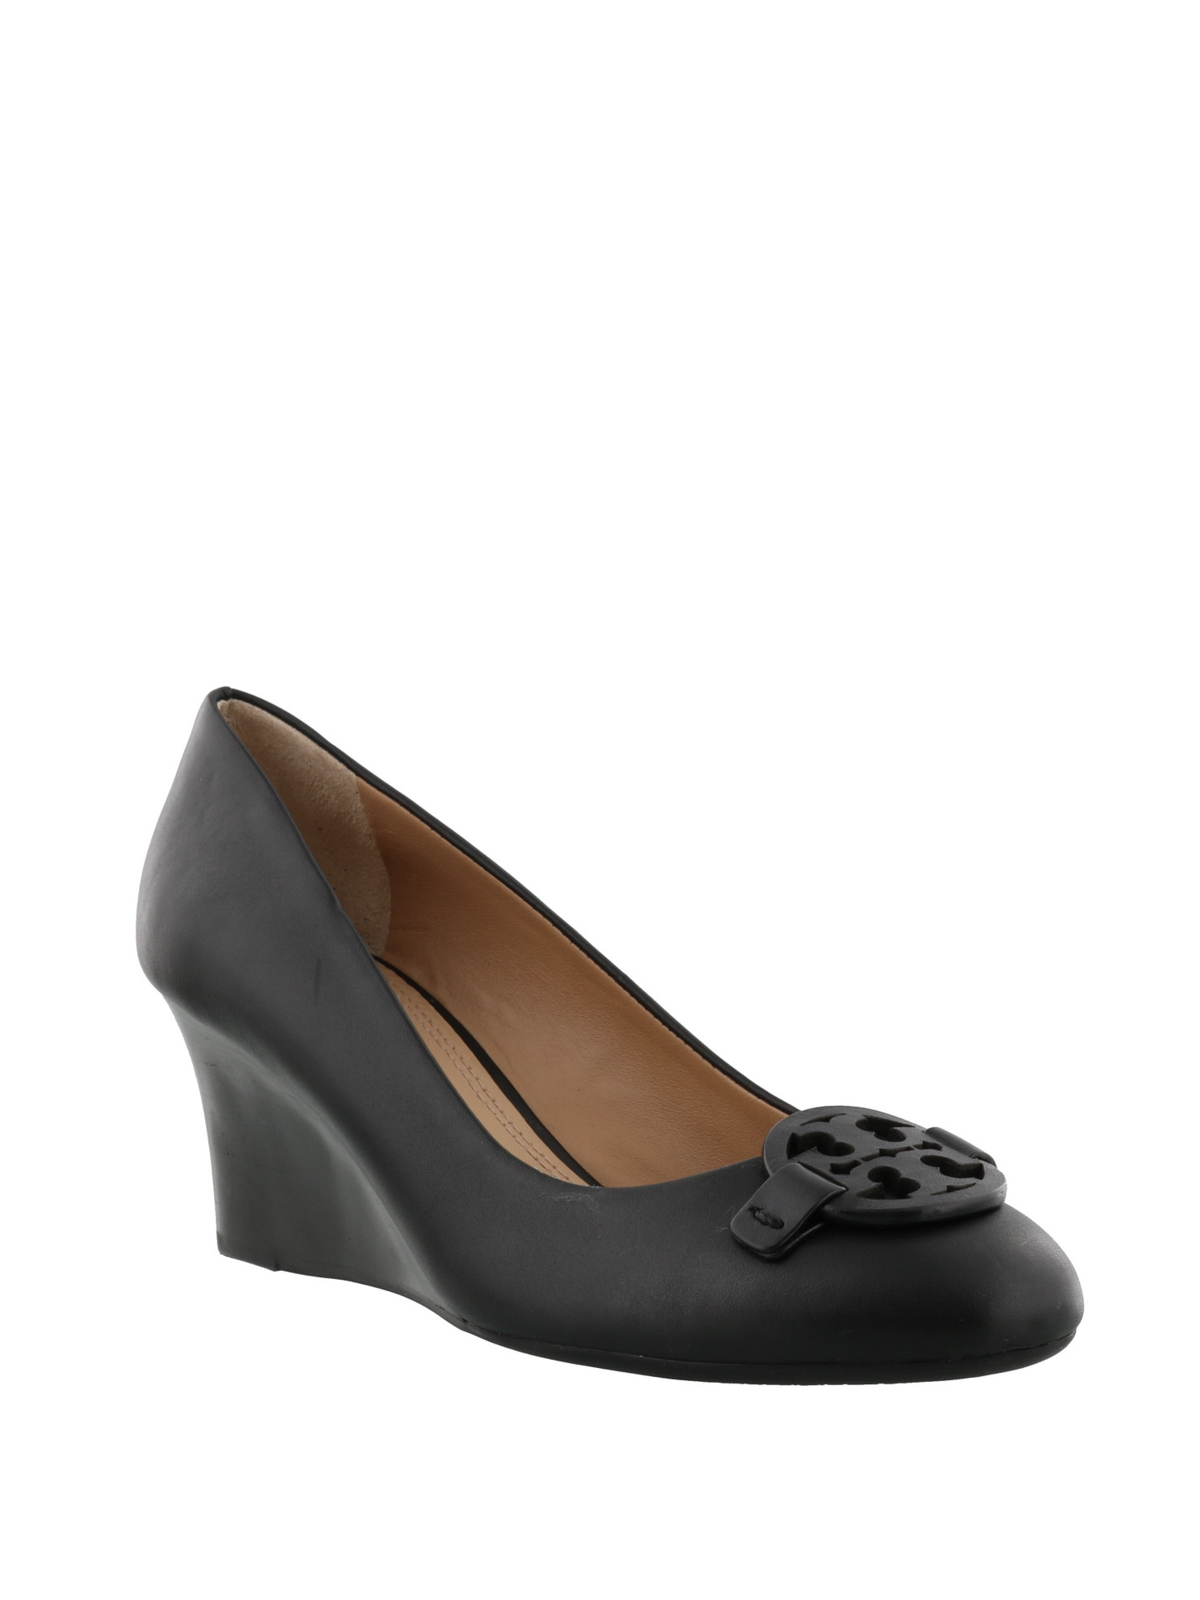 Tory Burch - Miller black leather wedge 